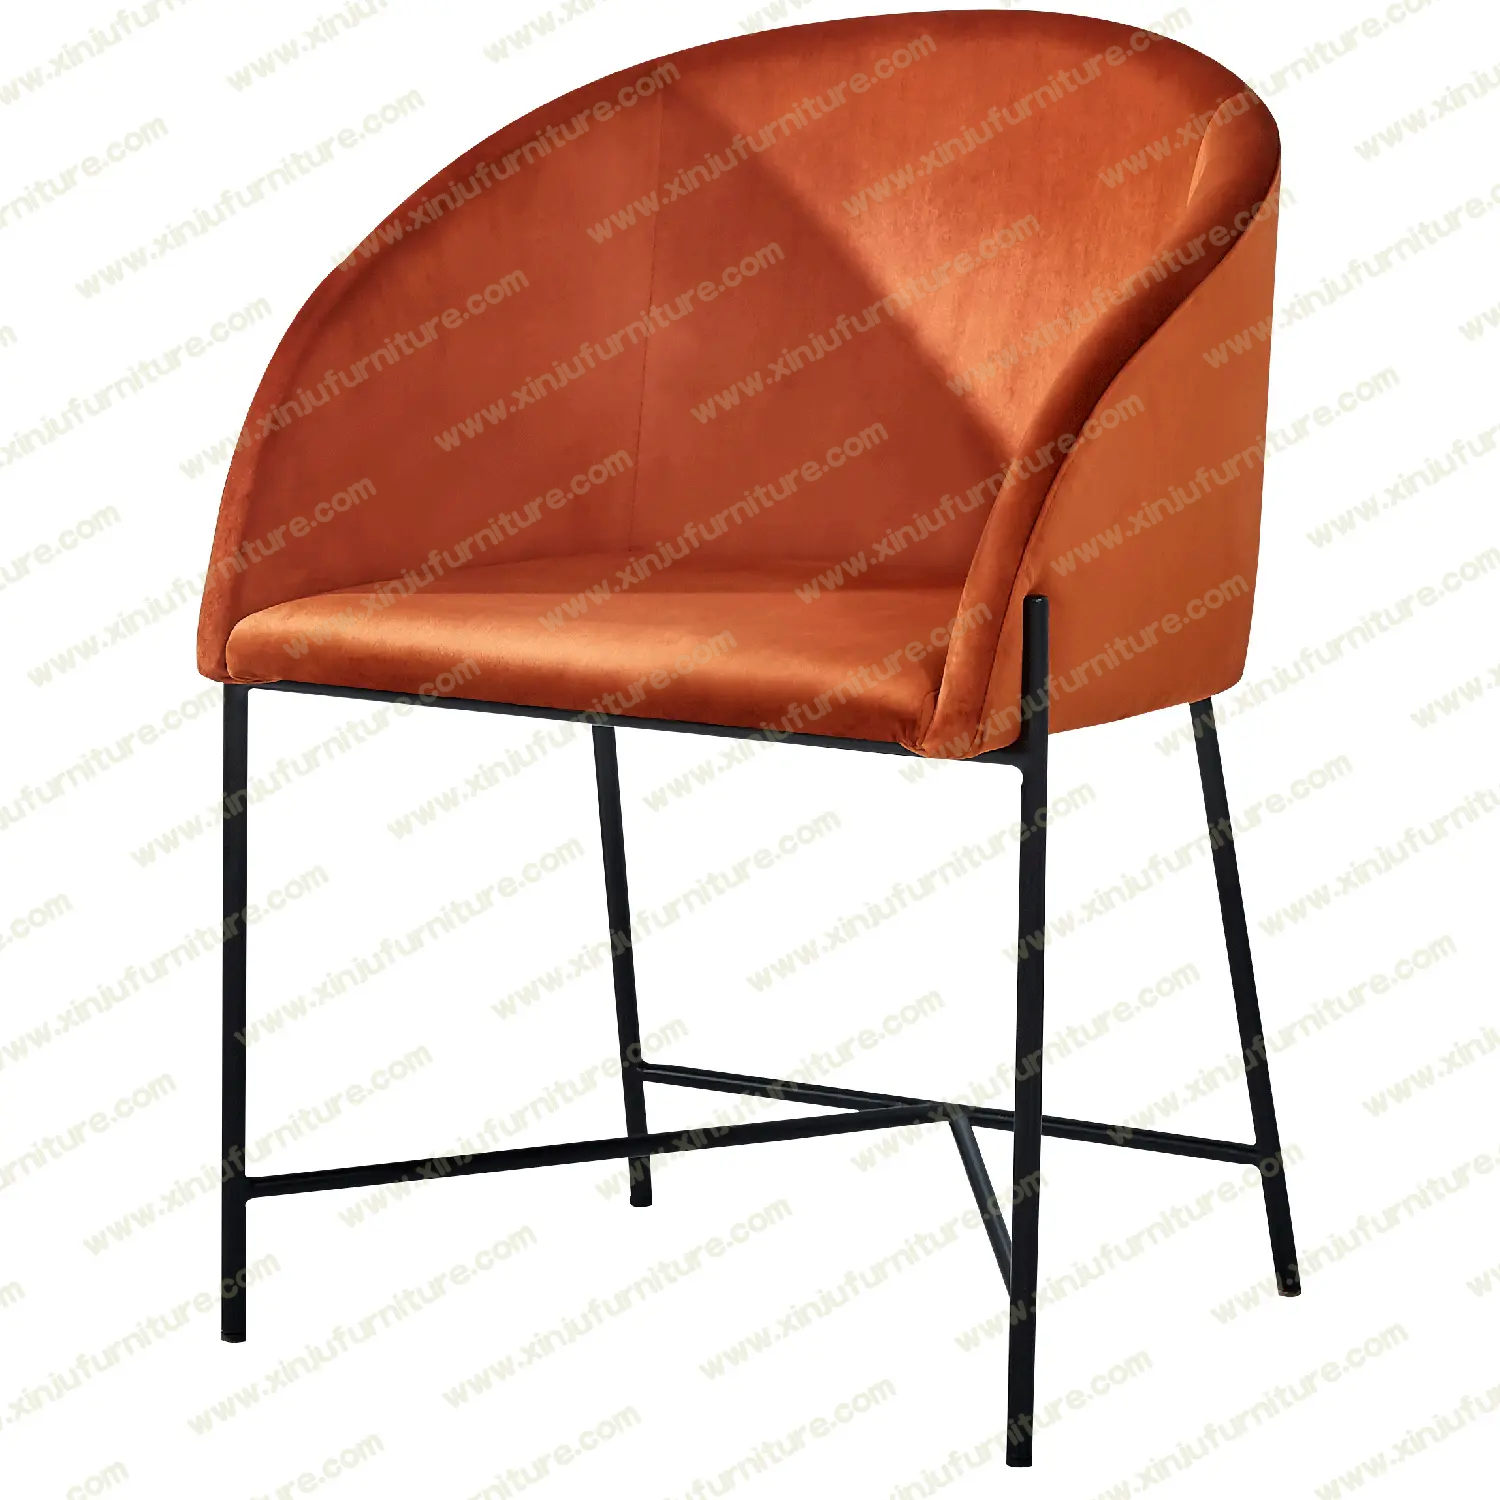 Durable tufted comfortable dining chair